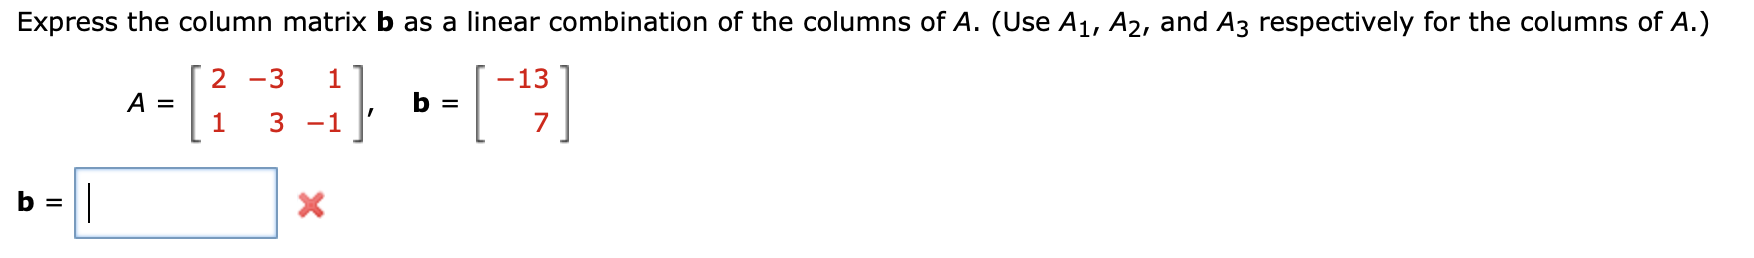 Express the column matrix b as a linear combination of the columns of A. (Use A1, A2, and A3 respectively for the columns of A.)
- [:
-3
1
-13
A =
1
b =
3 -1
7
b =
